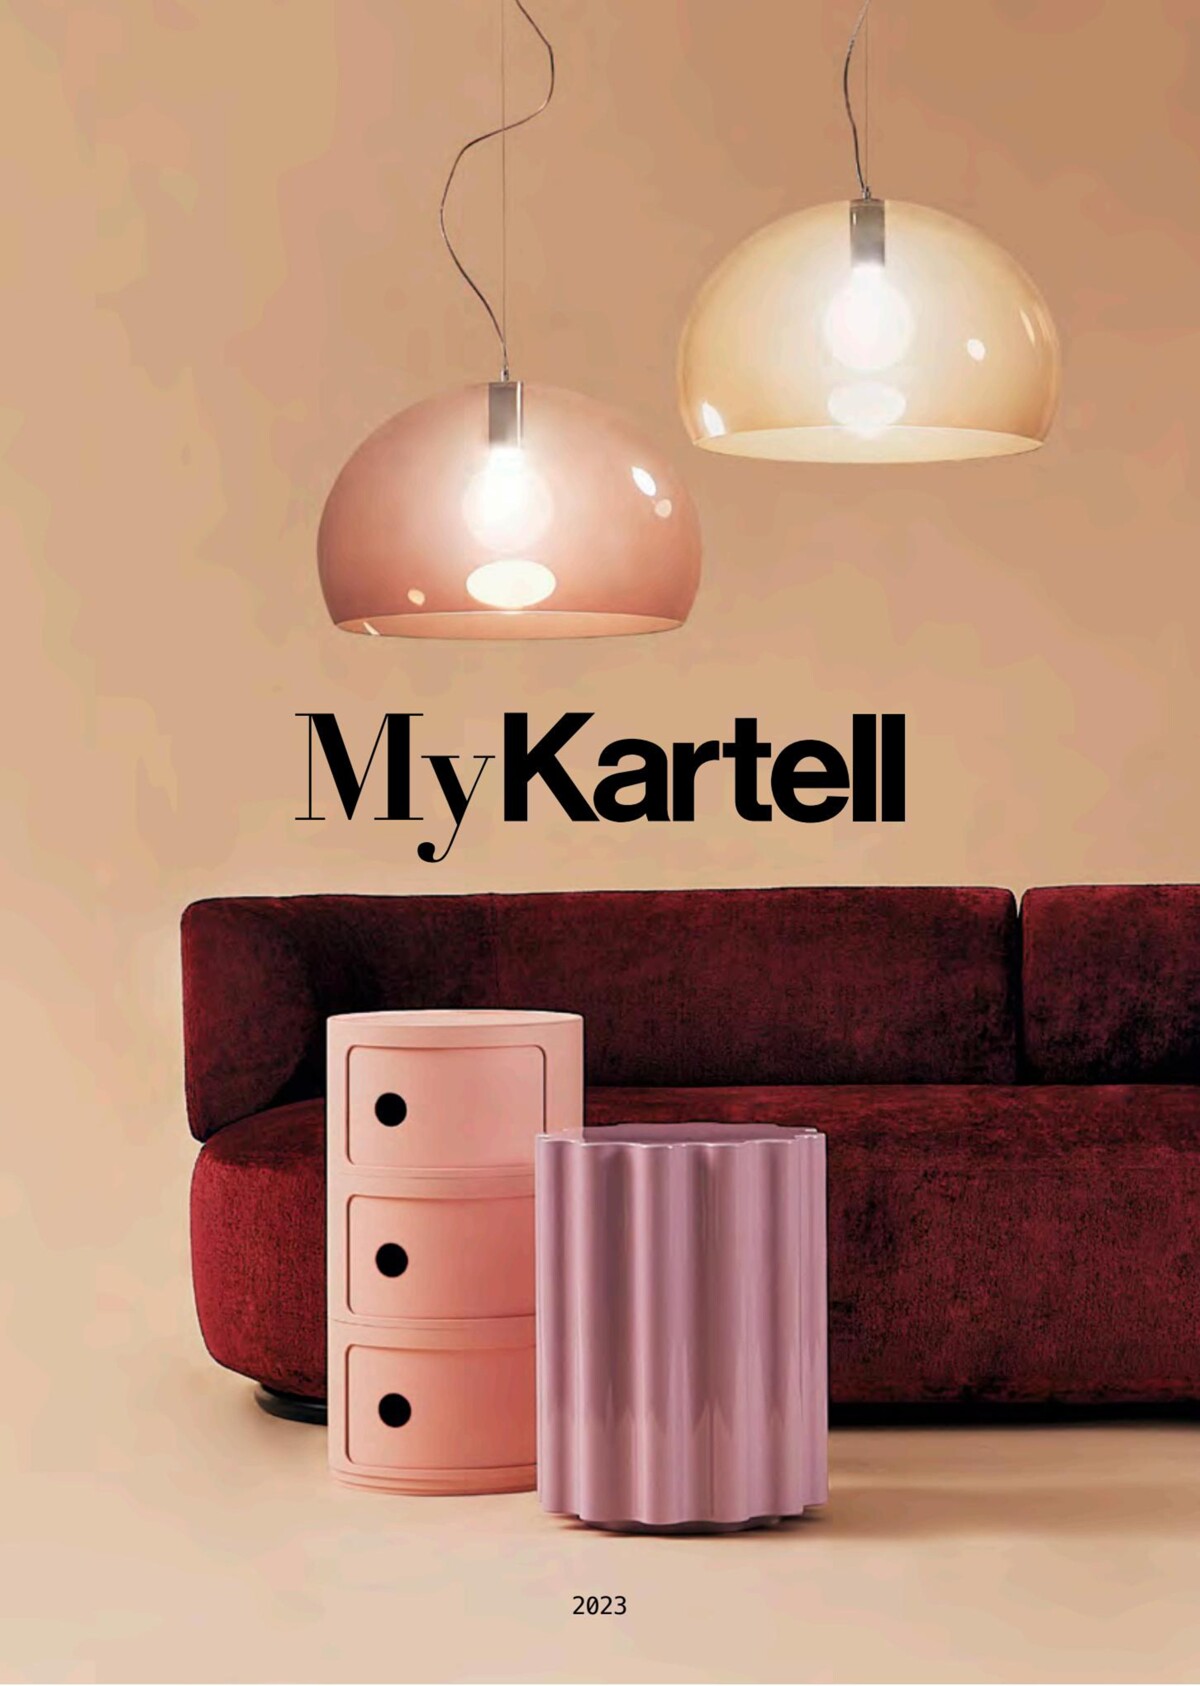 Catalogue 2023 KARTELL, page 00001